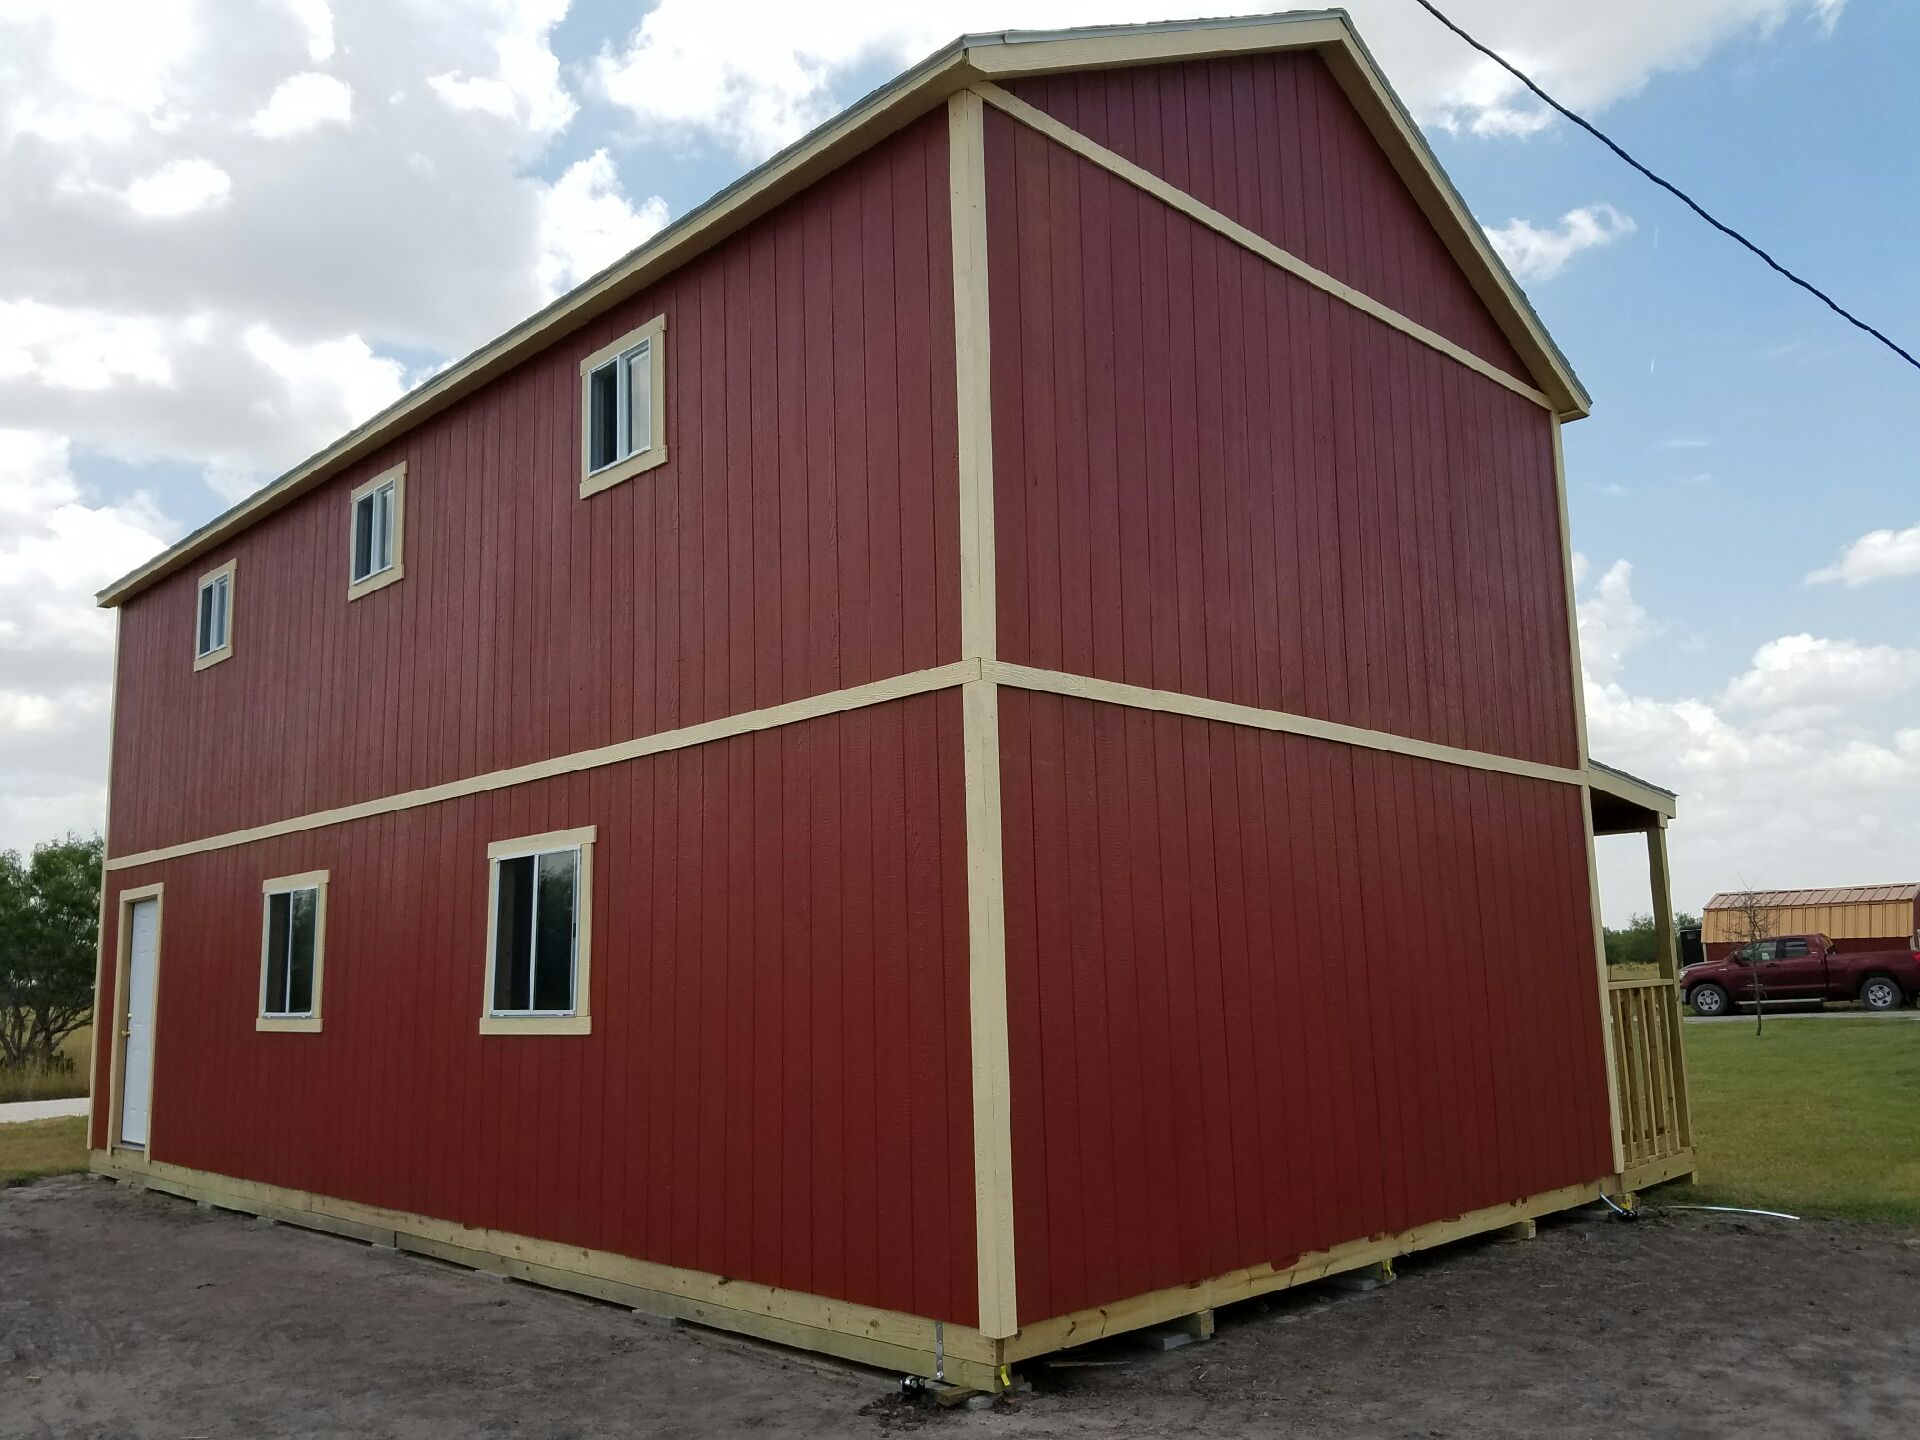 Just Right for Texas – Tuff Shed